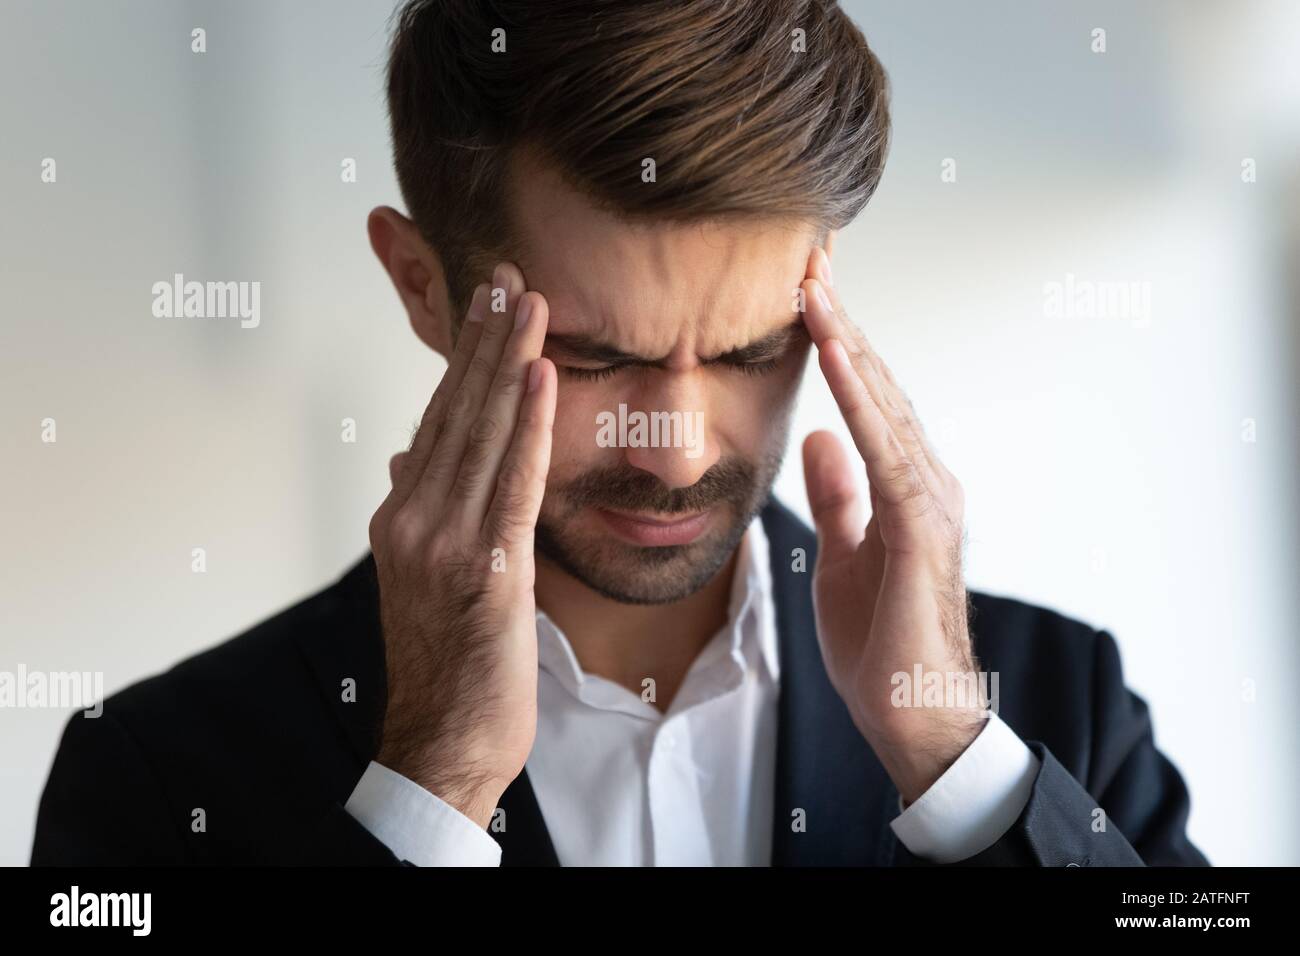 Businessman frown face closed eyes touches temples reduces migraine pain Stock Photo